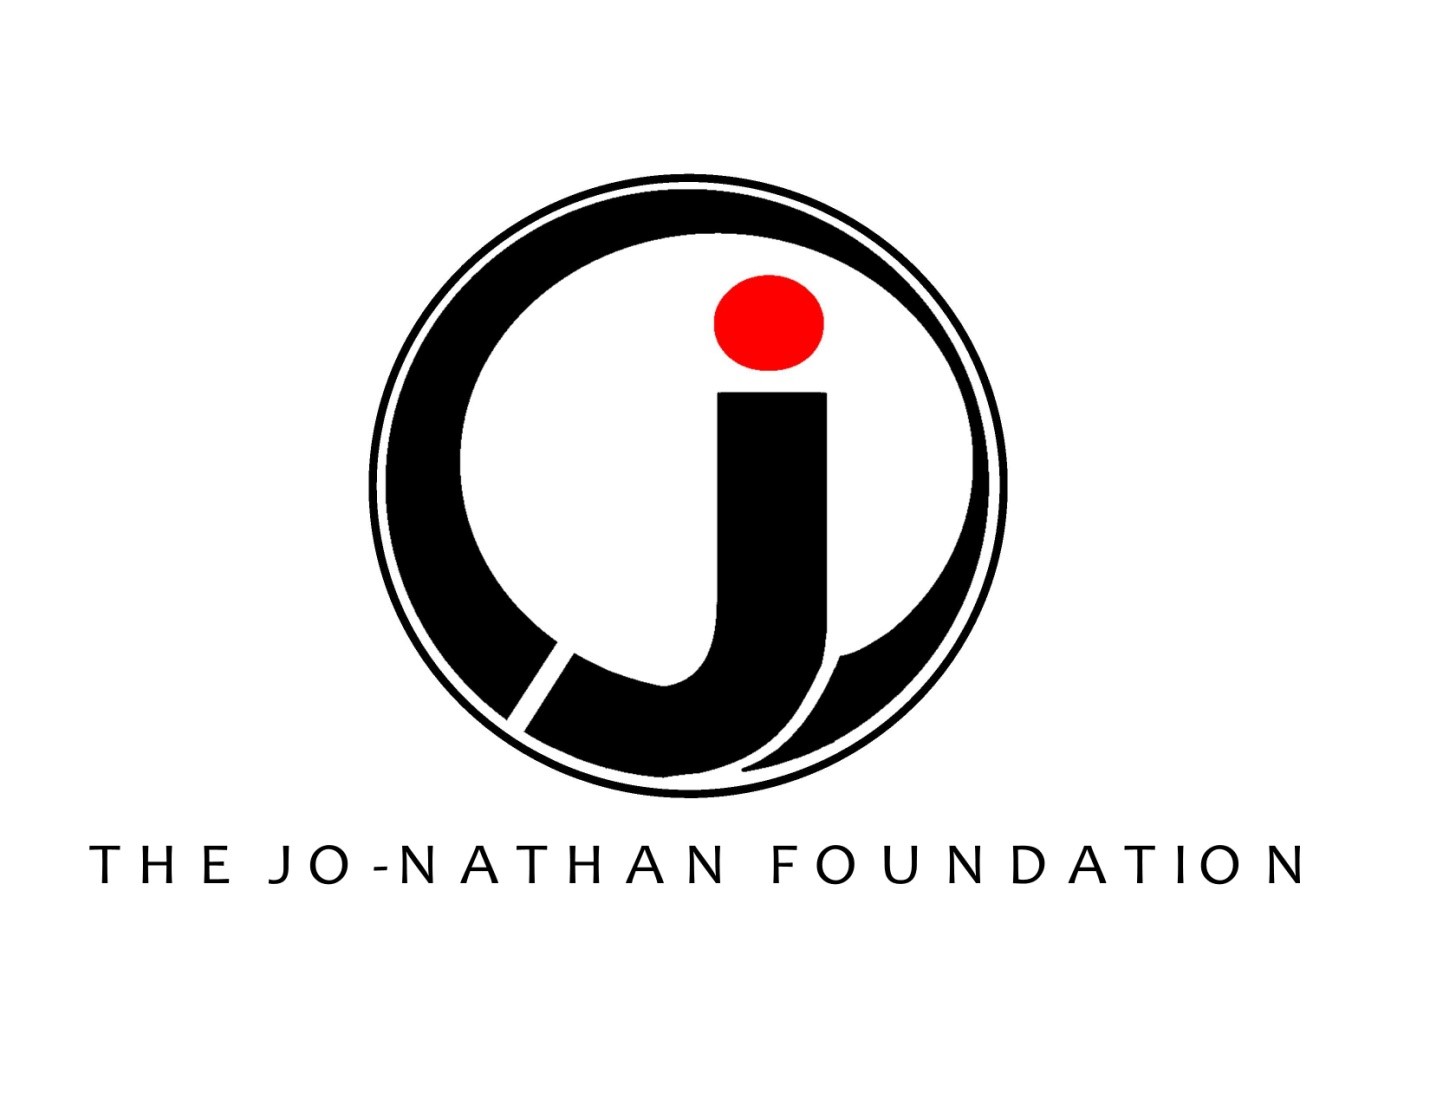 The Jo-Nathan Foundation